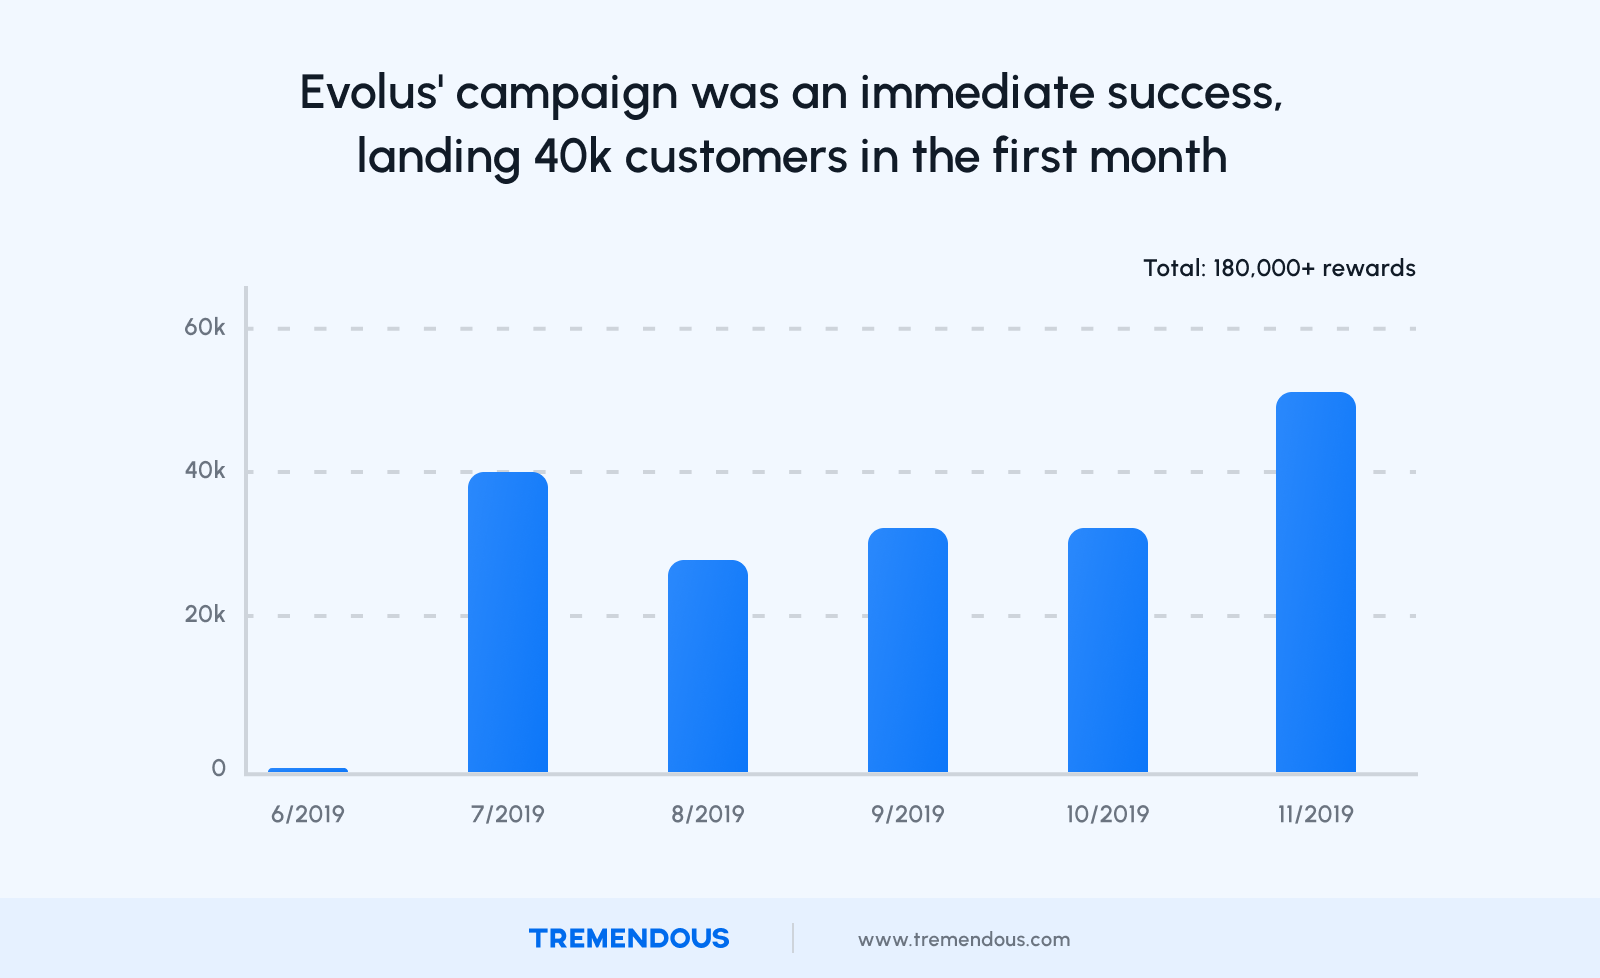 A bar graph showing how Evolus' campaign was an immediate success, landing 40k customers in the first month.